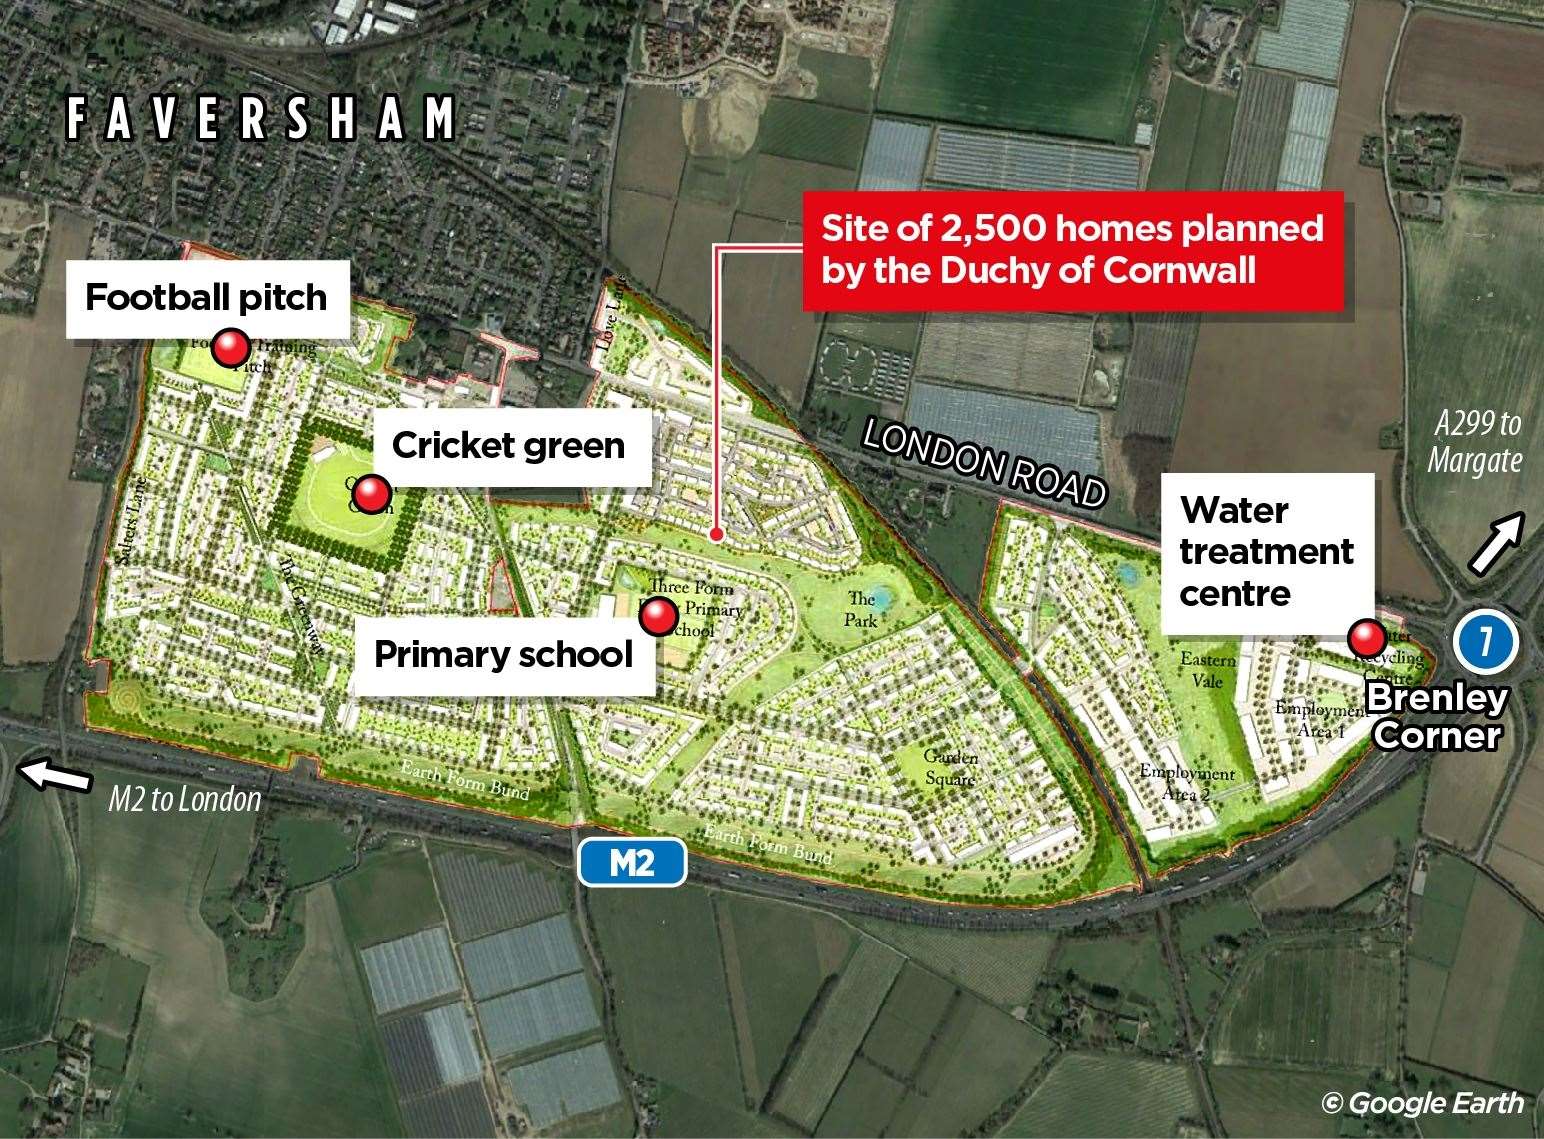 A map showing the plans for the Duchy of Cornwall's development in Faversham